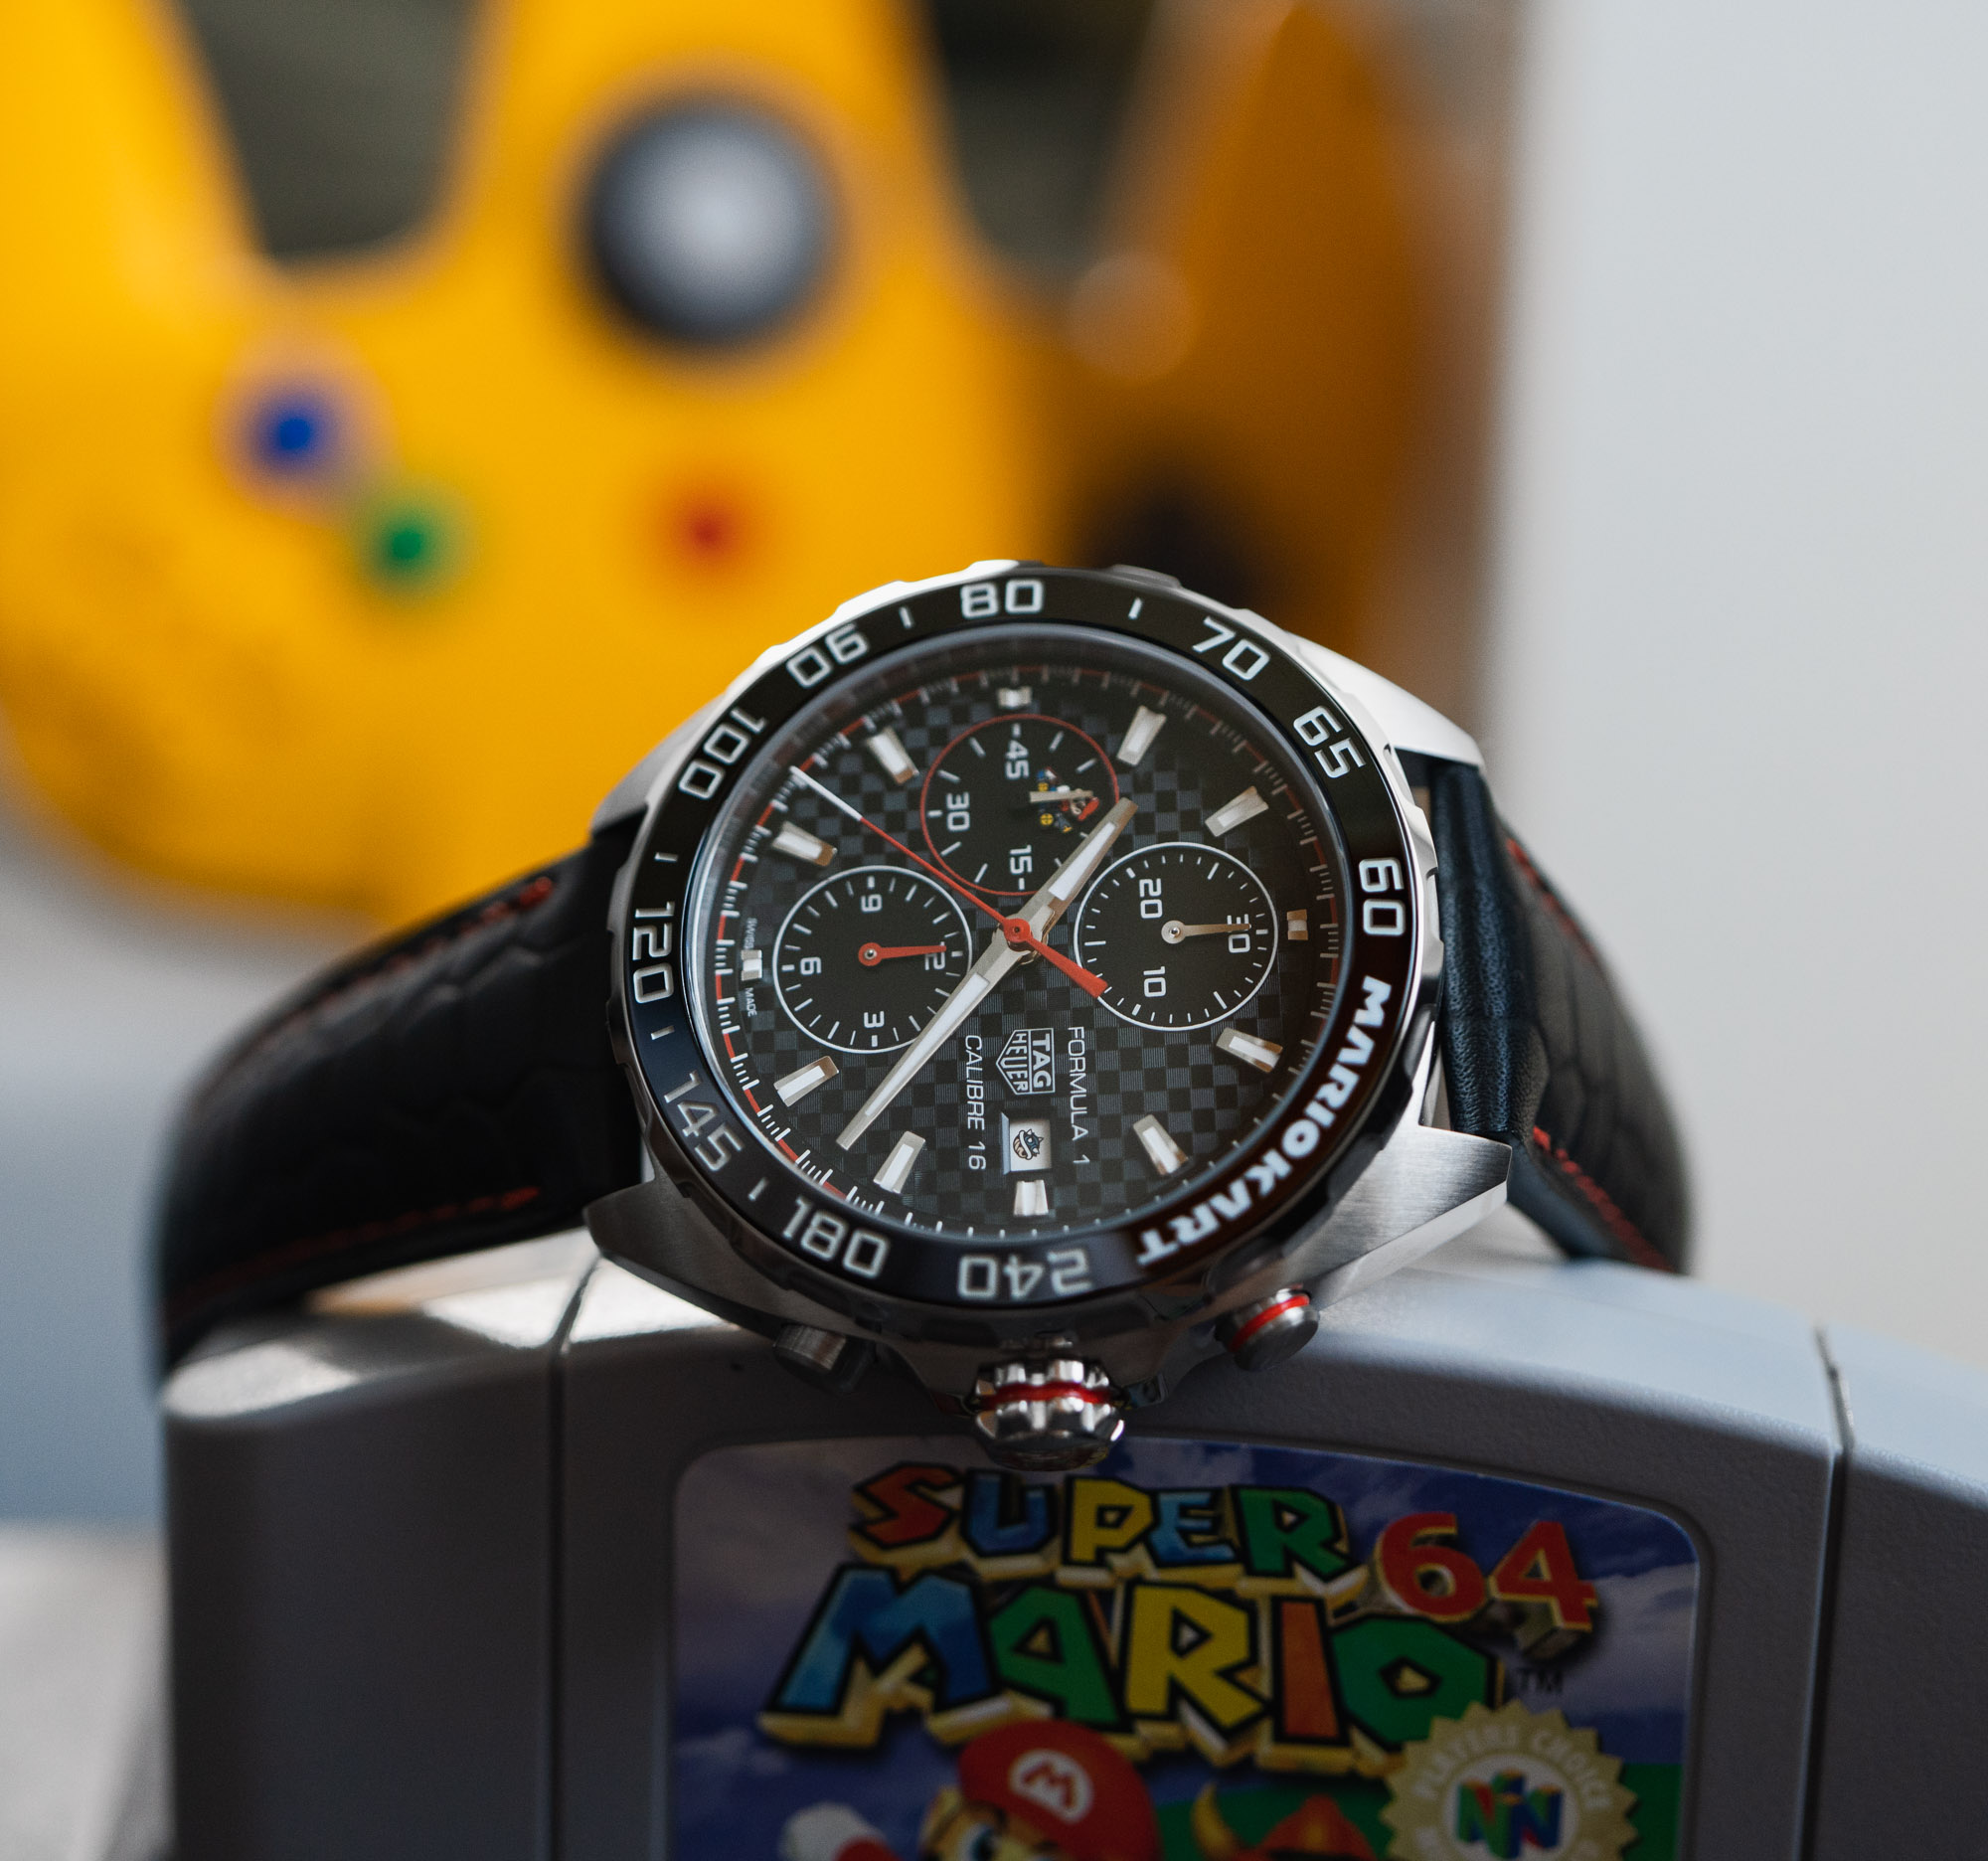 First Take: The TAG Heuer Carrera Calibre 16 Chronograph (VIDEO) - Hodinkee